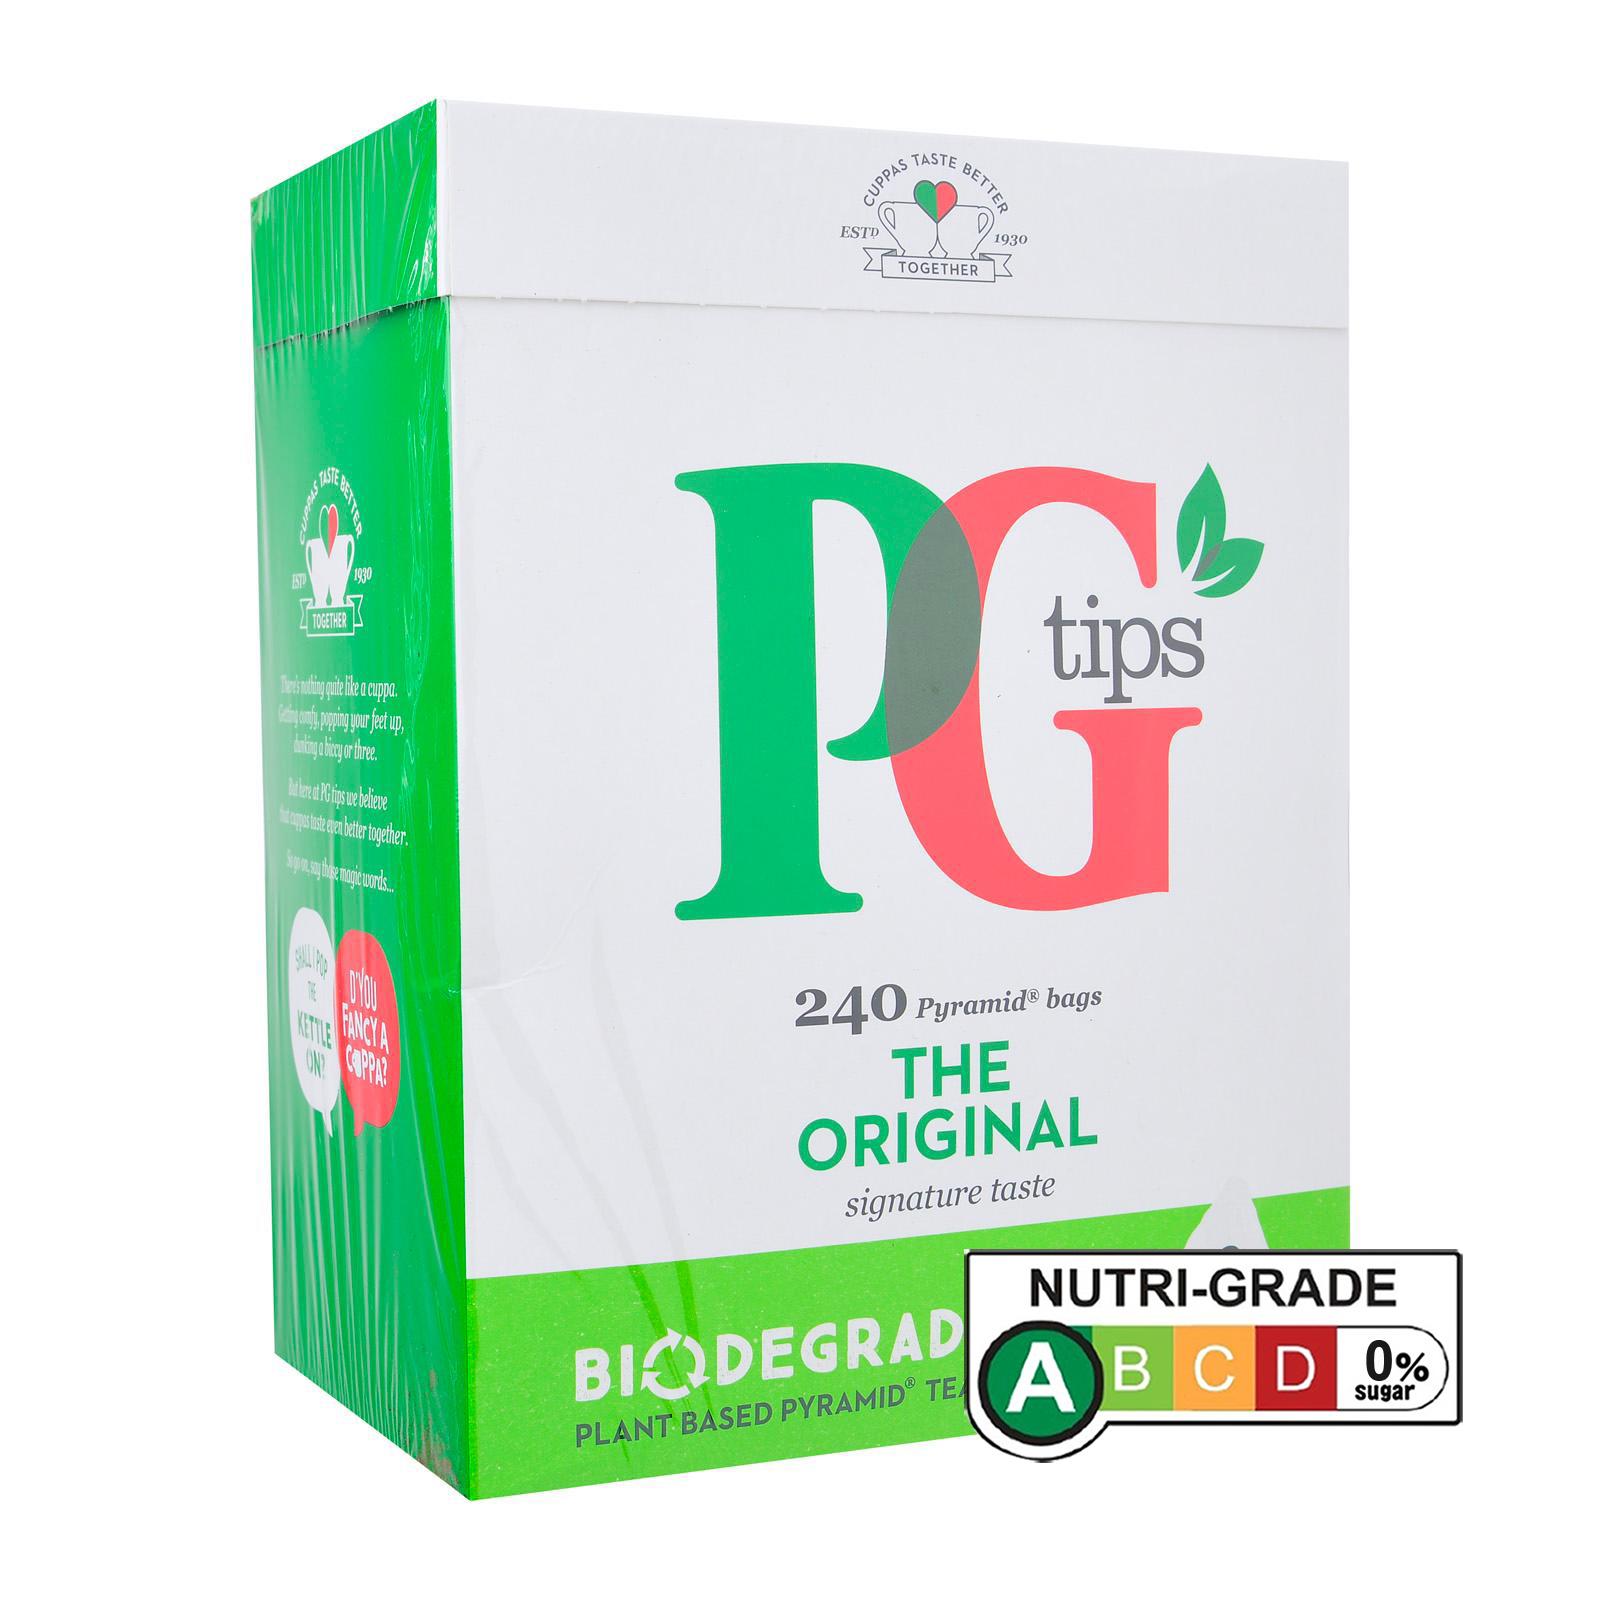 PG Tips Black Tea, Pyramid Tea Bags, 80Count Boxes (Pack of 4)